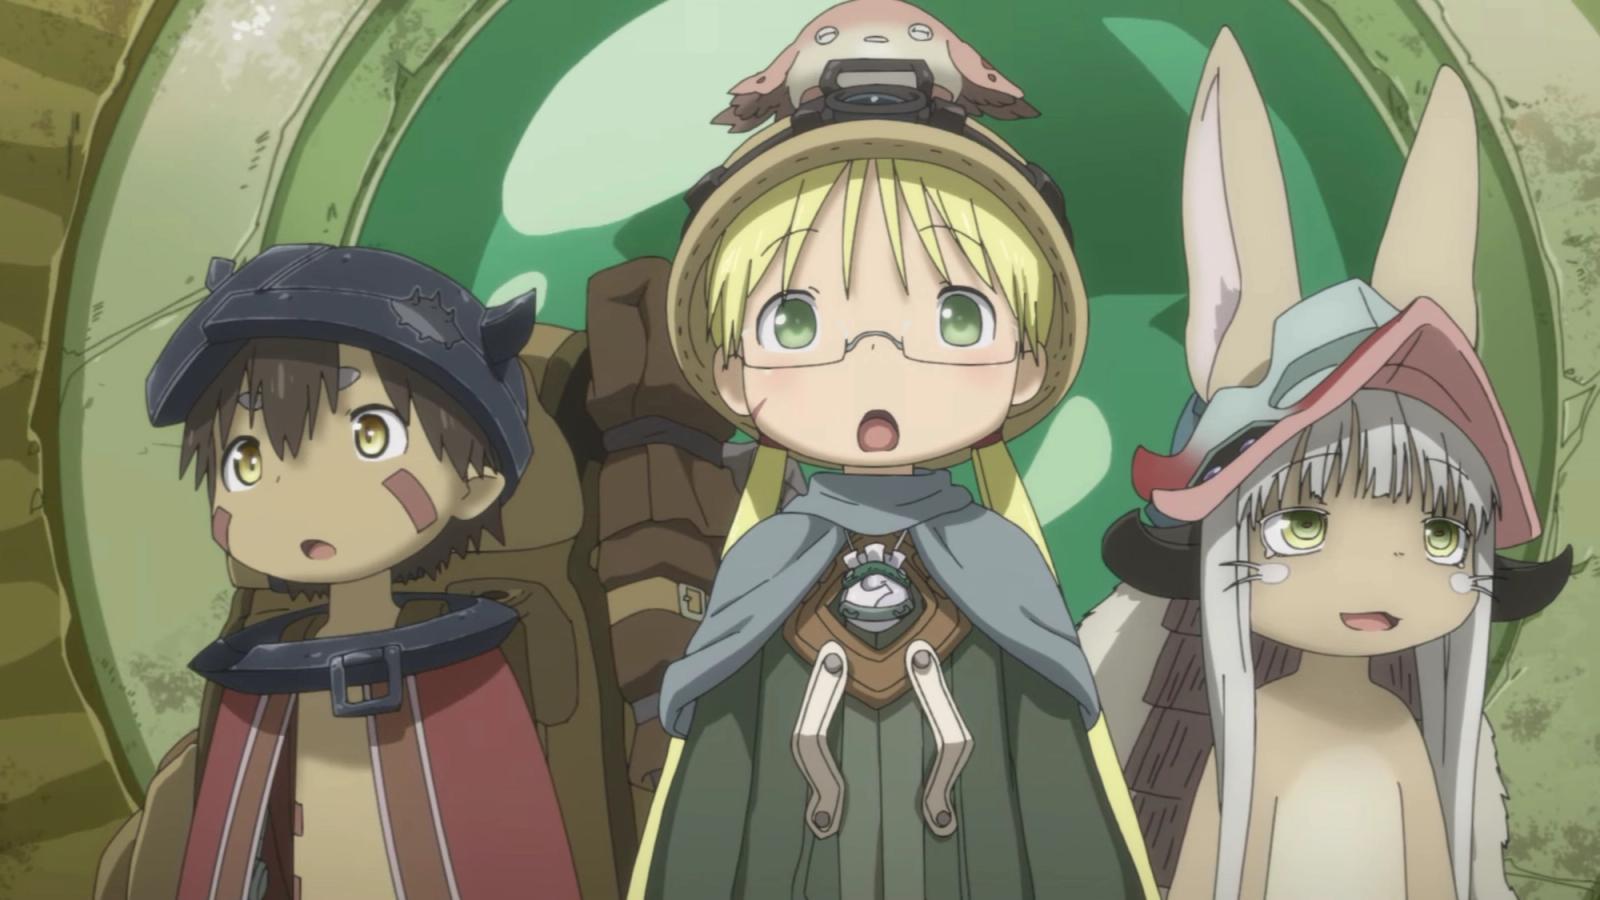 Made in Abyss Season 2 Release Date